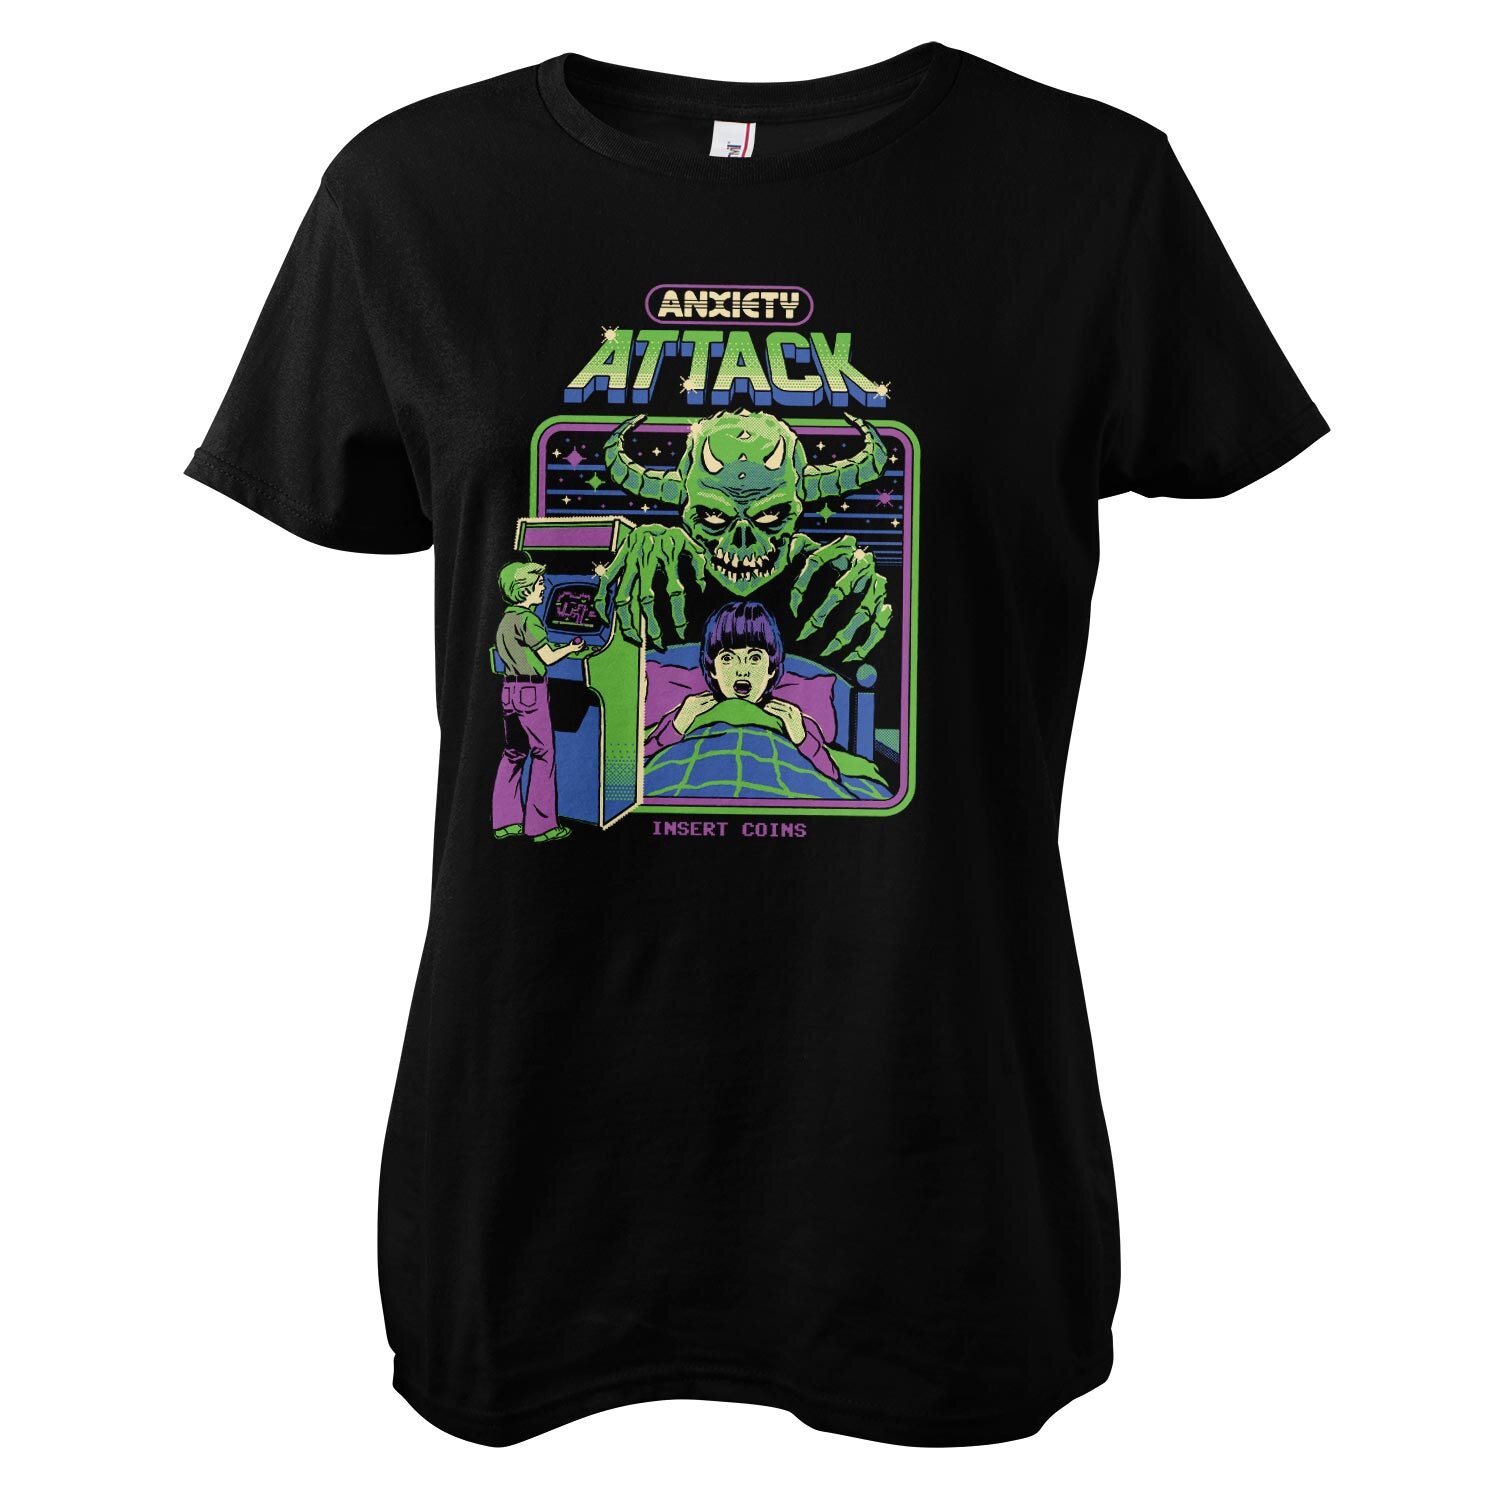 Anxiety Attack Girly Tee